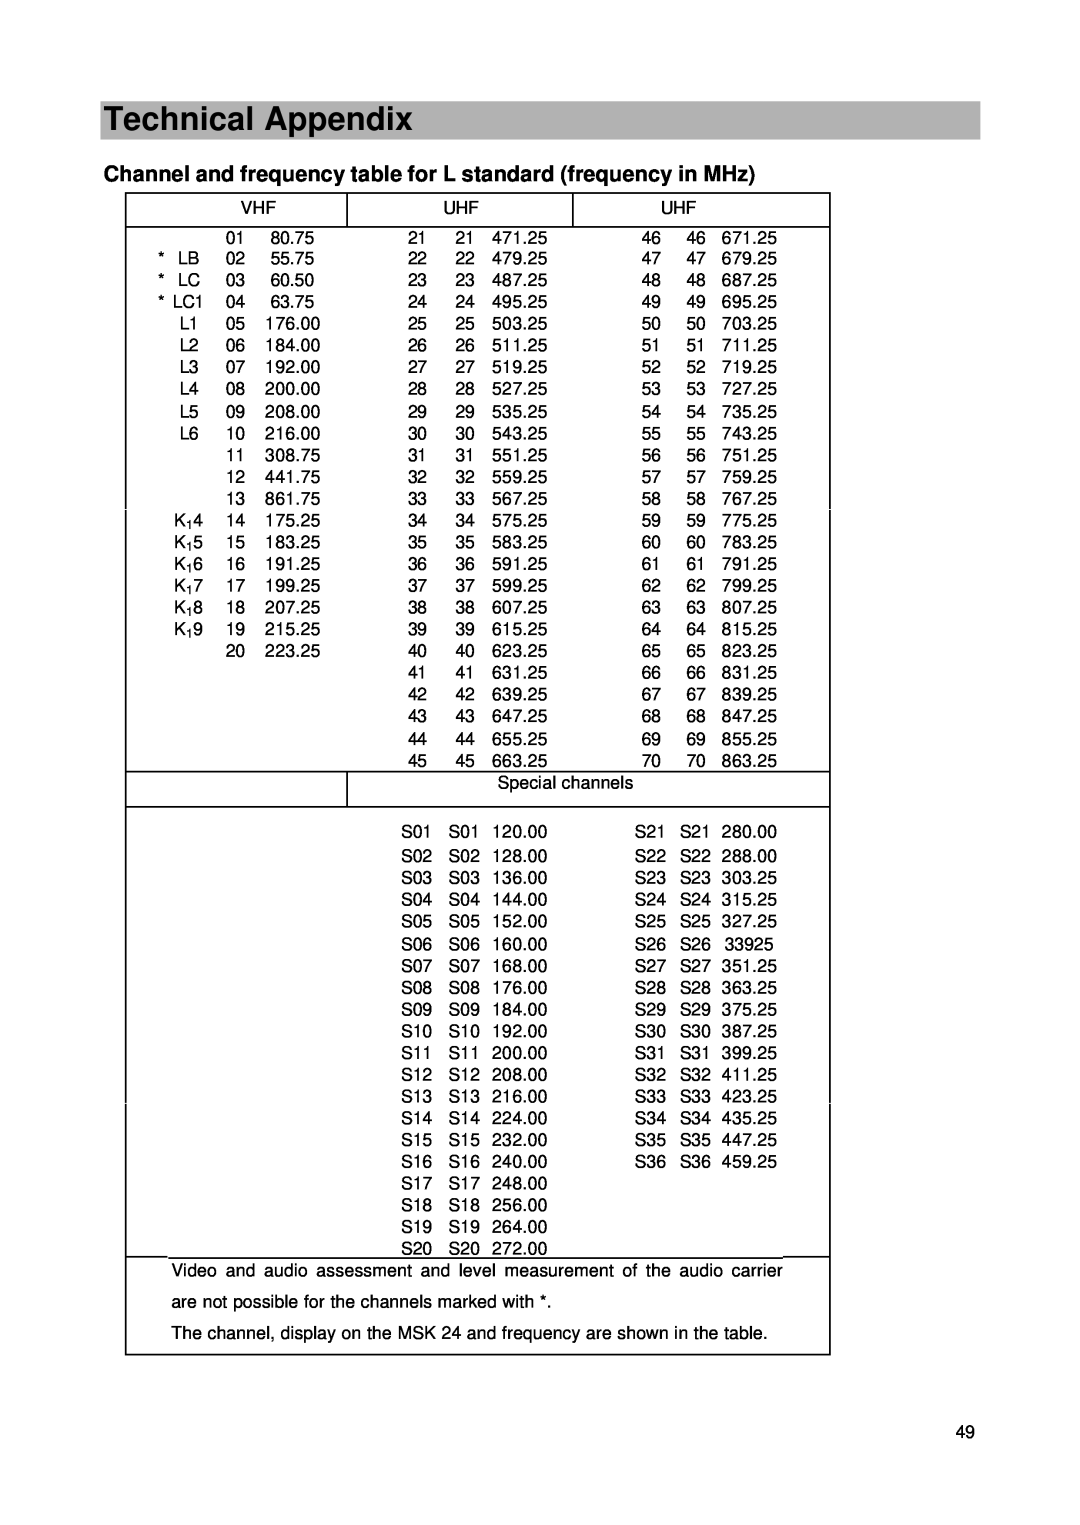 Kathrein MSK 24 manual Channel and frequency table for L standard frequency in MHz, Technical Appendix 